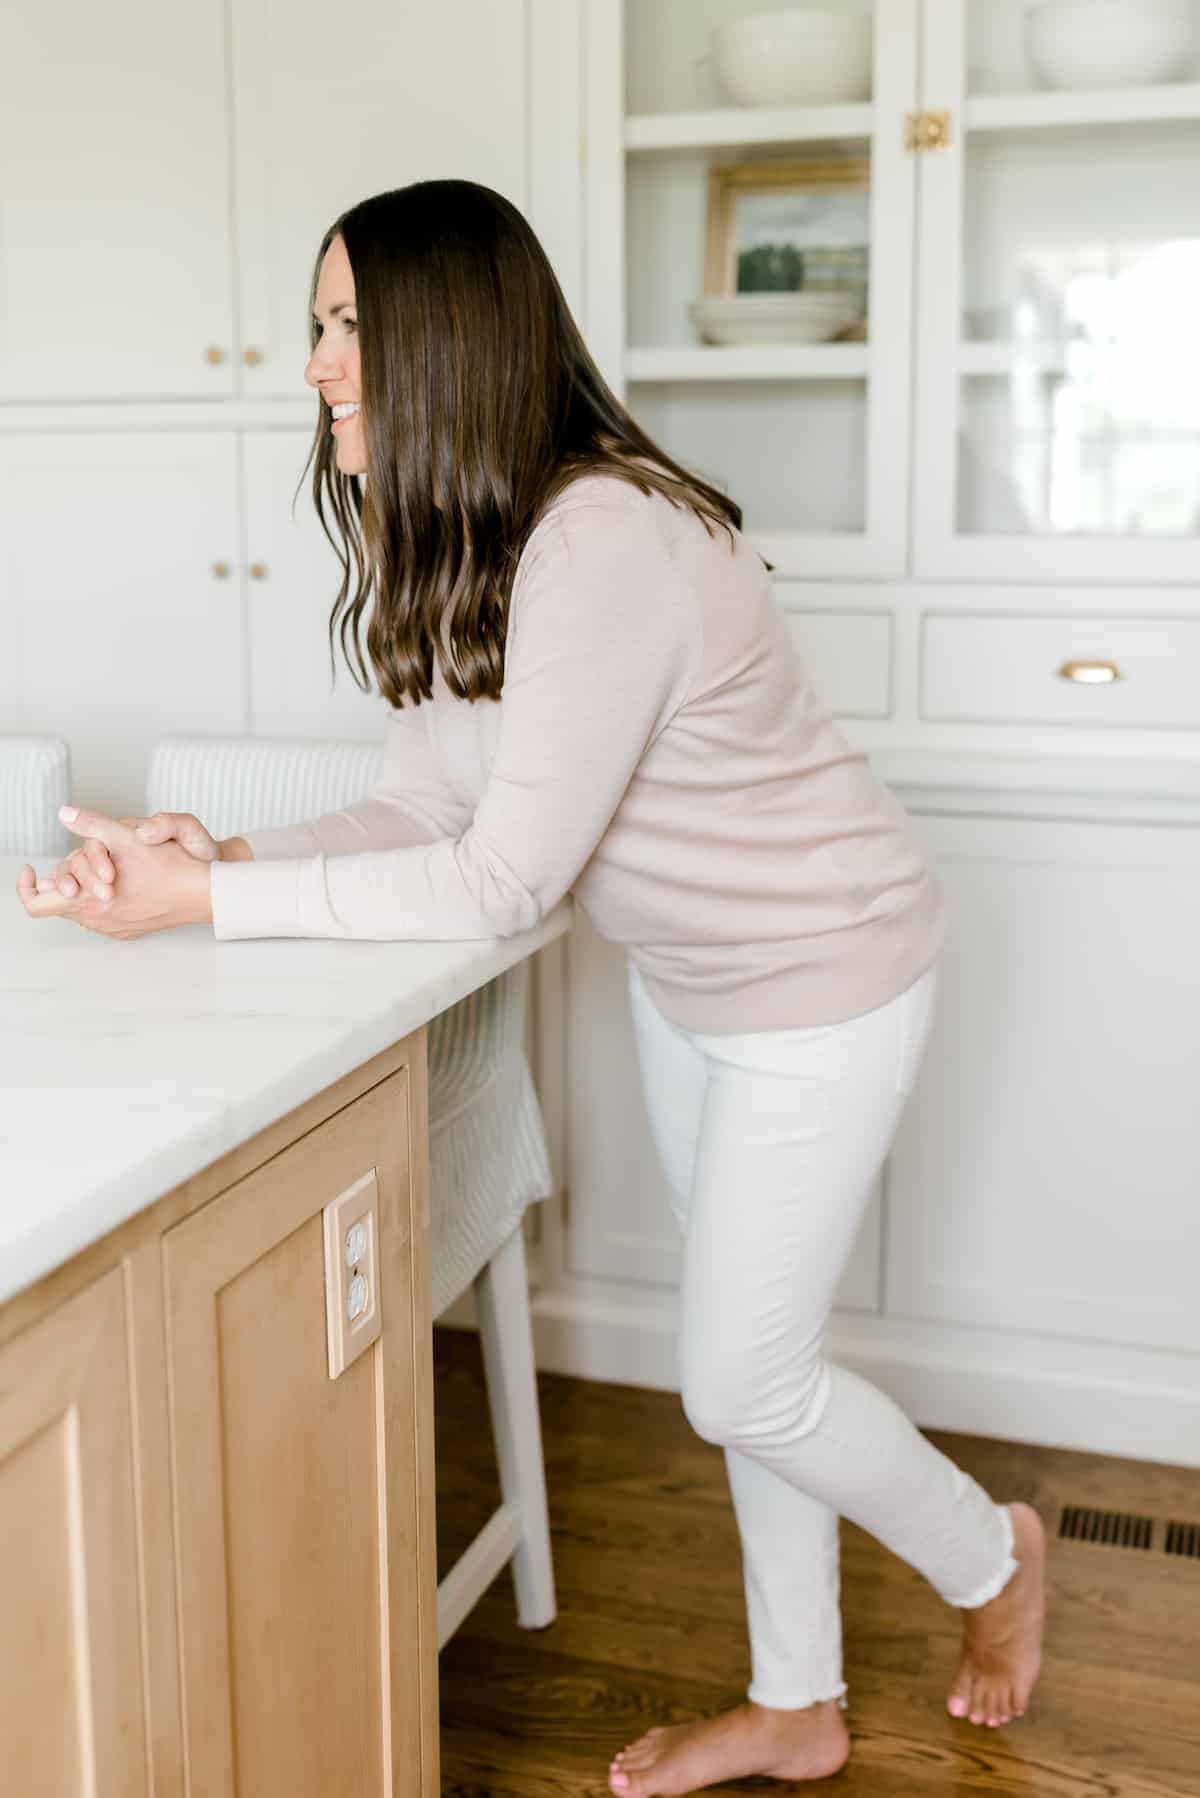 A brown haired woman leaning across a kitchen island in a white kitchen.